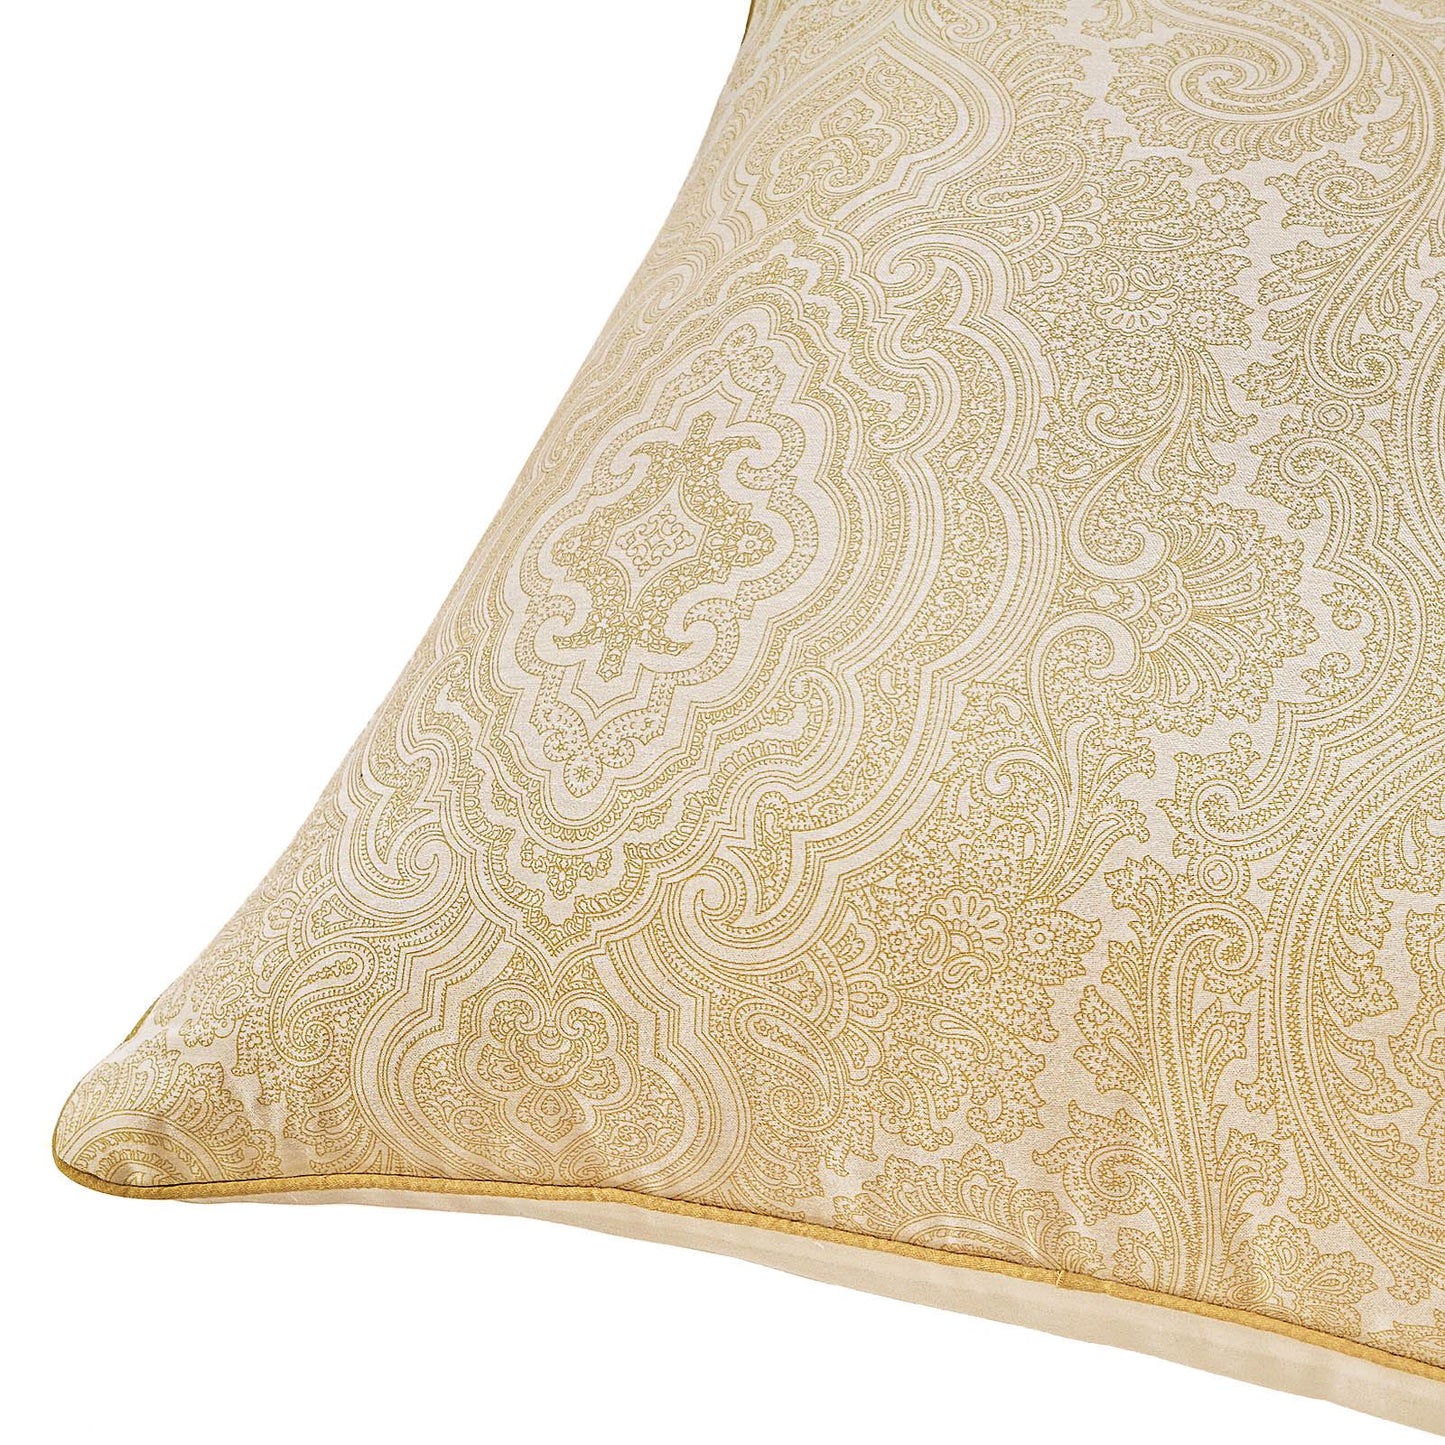 Luxurious Paisley Print Duvet Cover Set with Cotton Rich Fabric